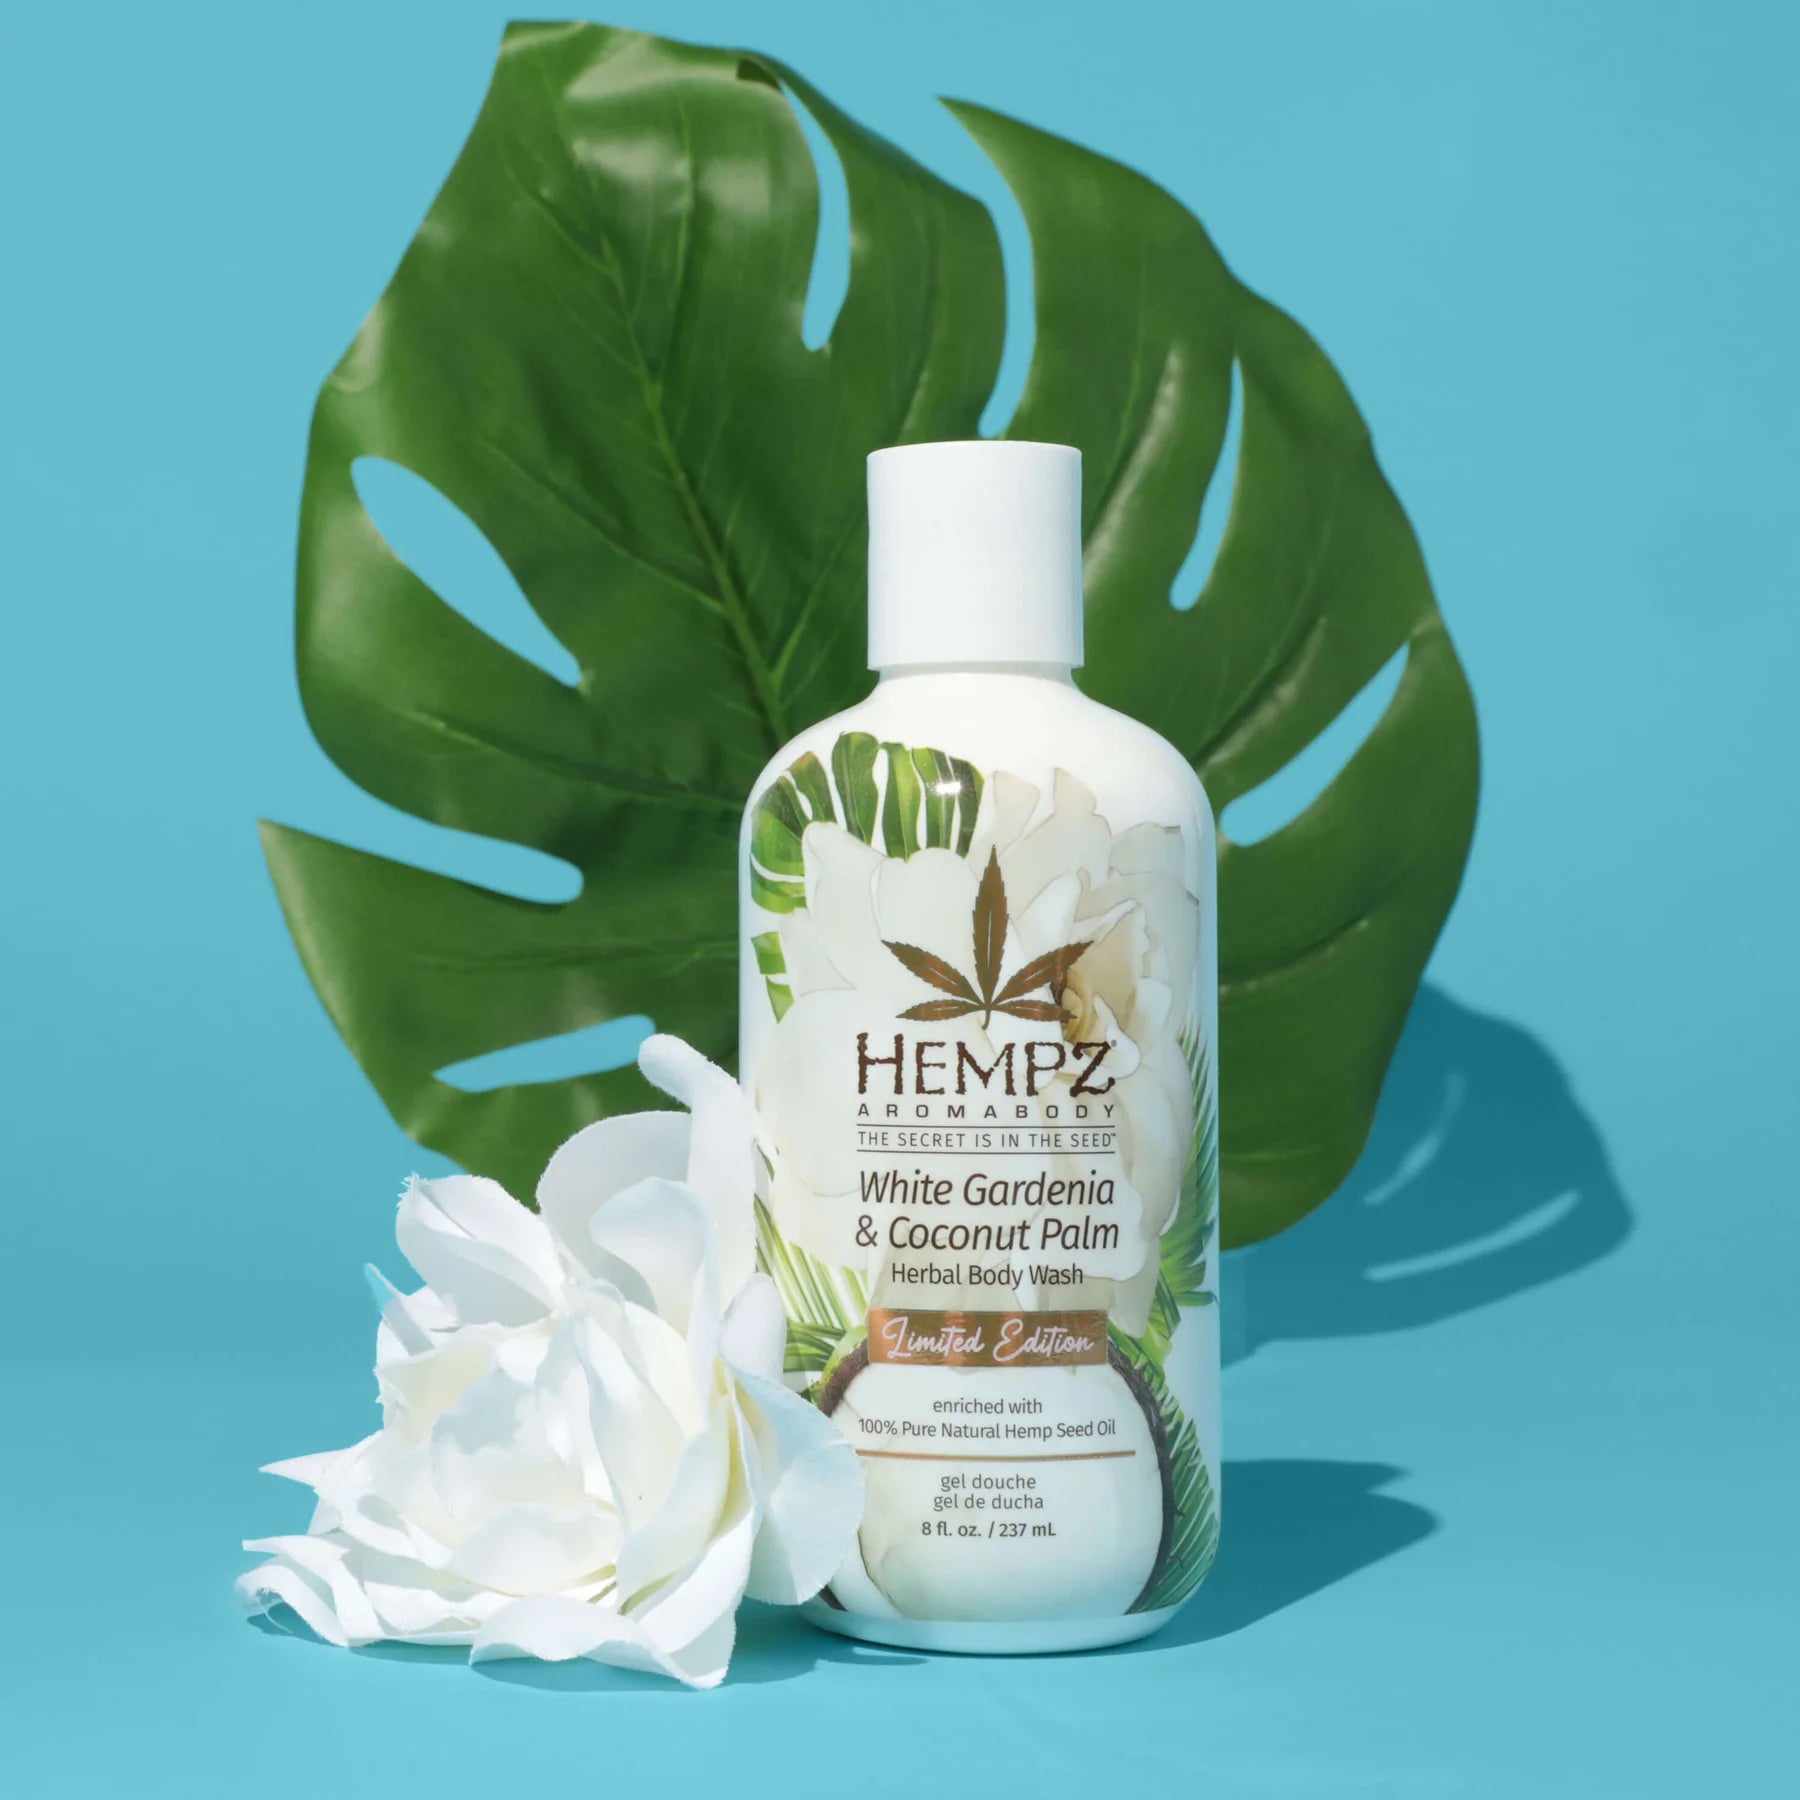 Hempz - Limited Edition White Gardenia & Coconut Palm Herbal Body Wash - Creata Beauty - Professional Beauty Products